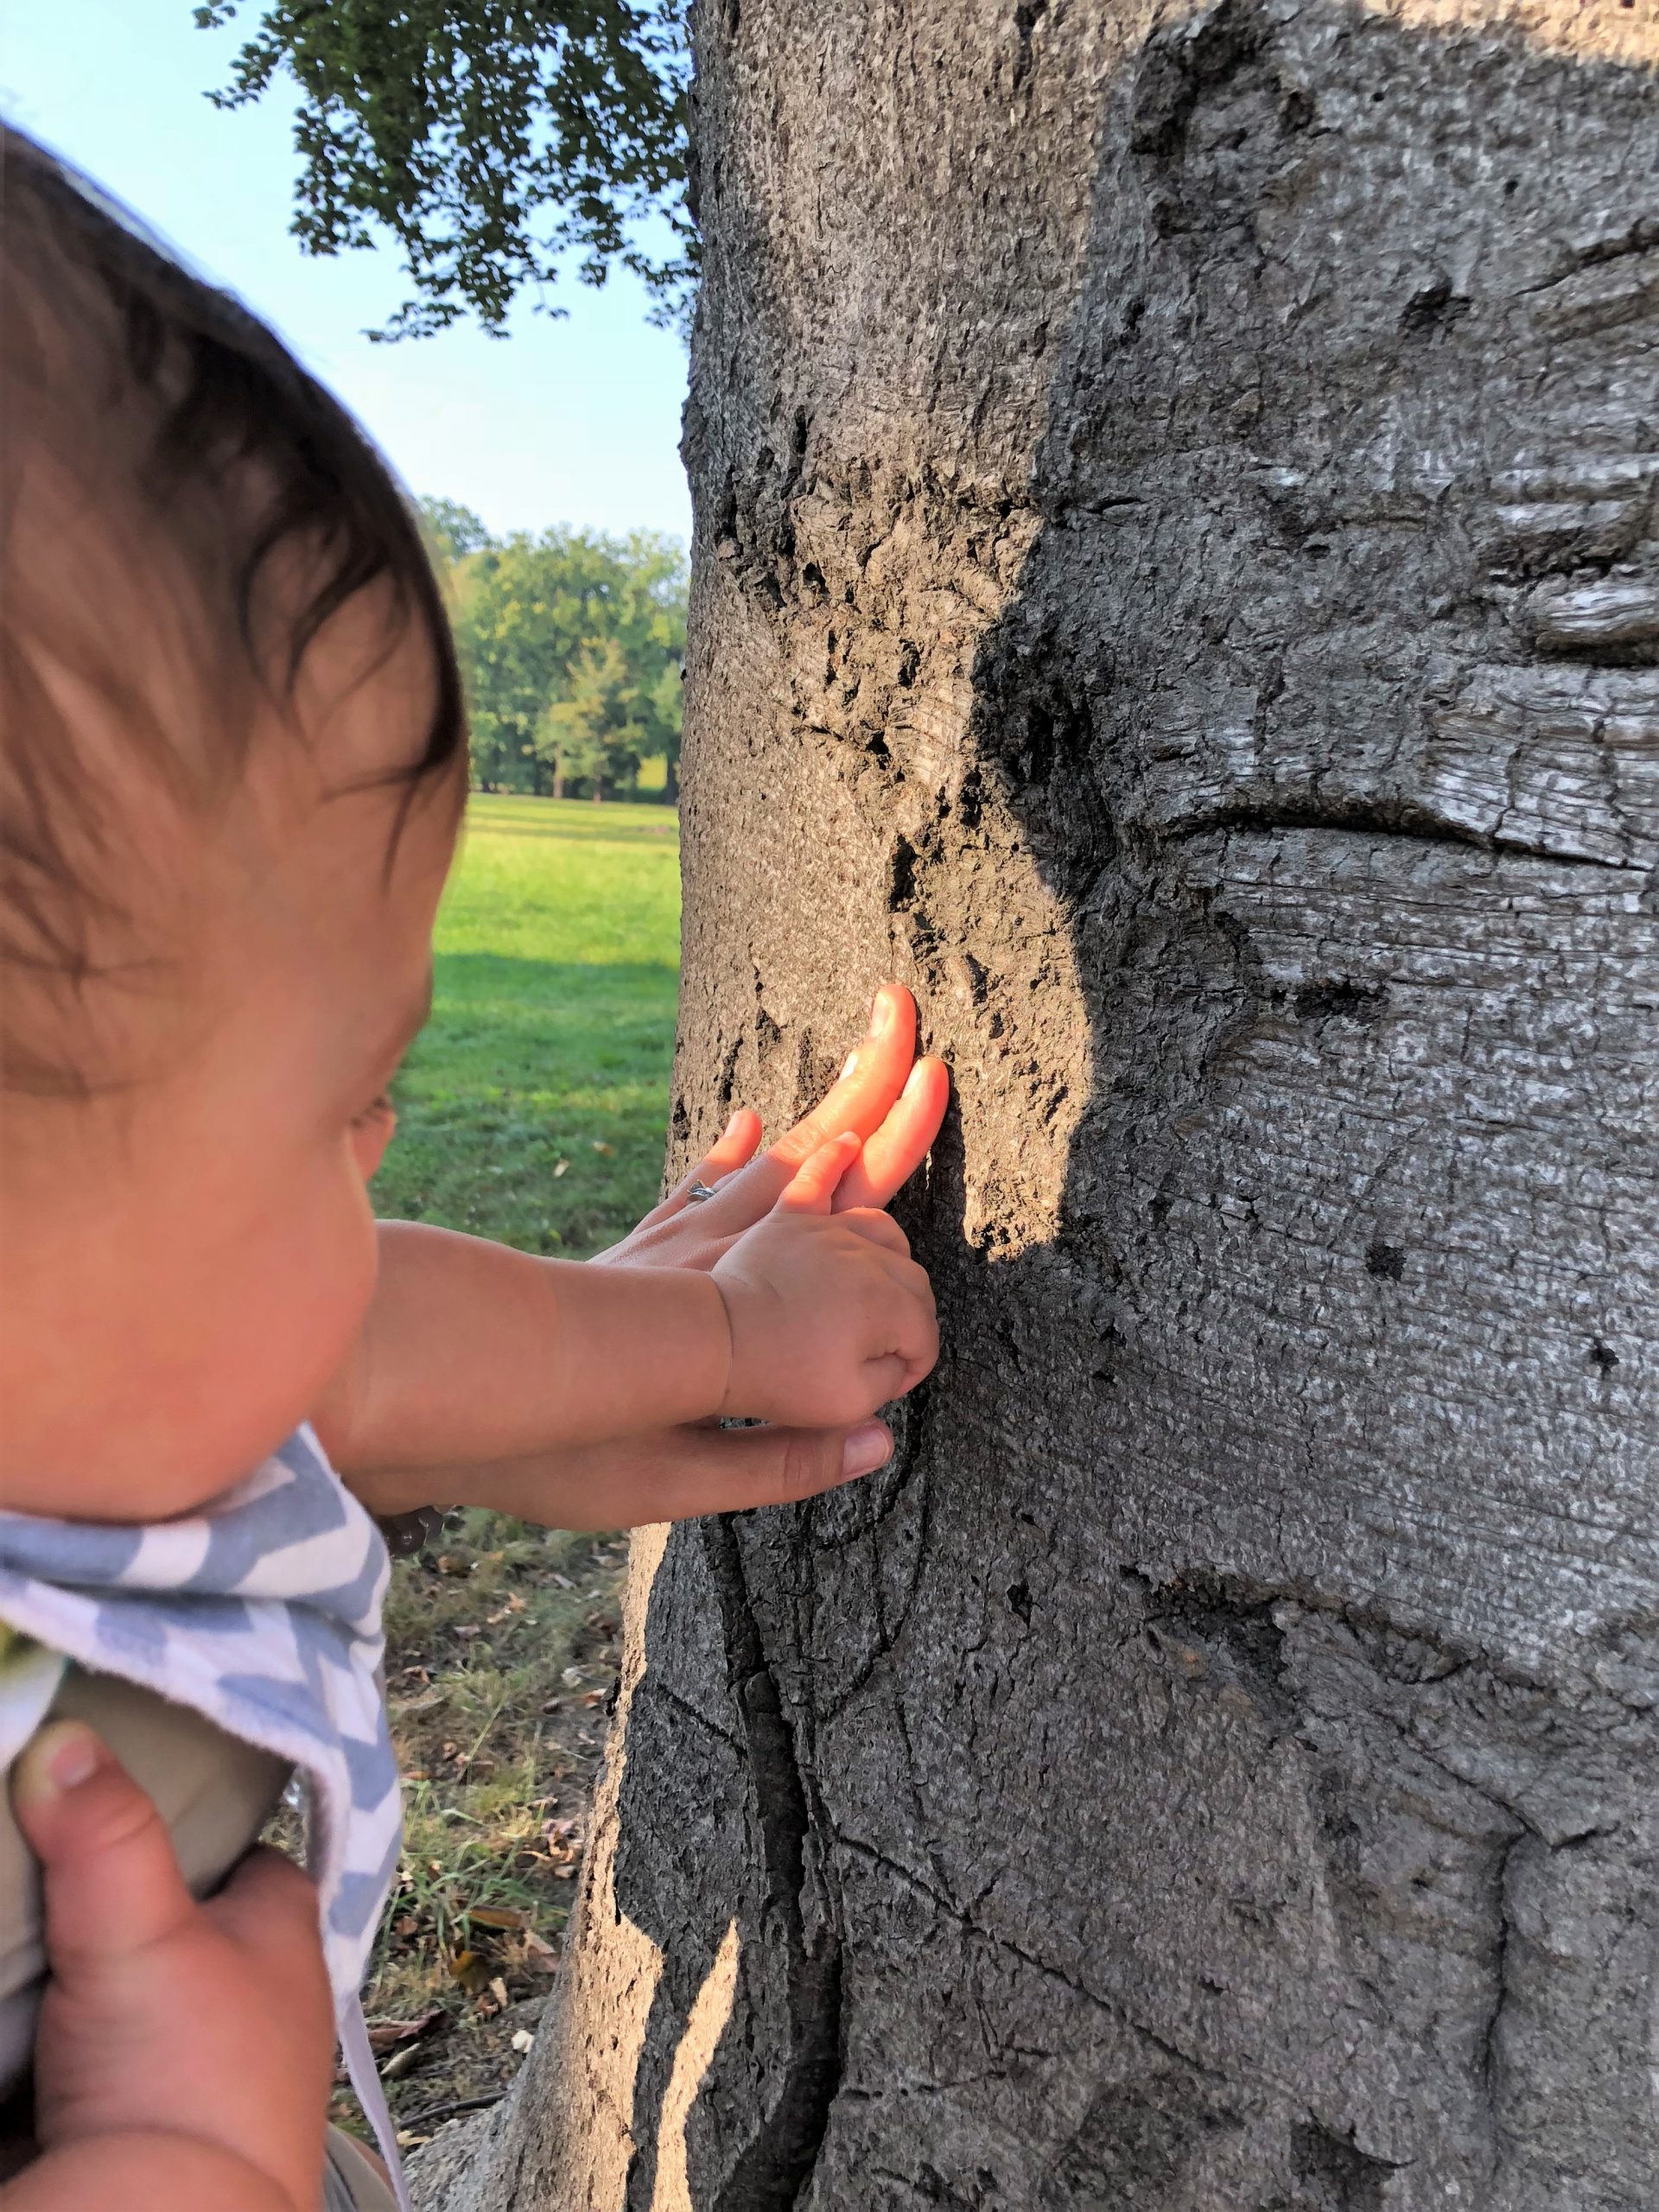 Experiencing the tactile joy of trees.